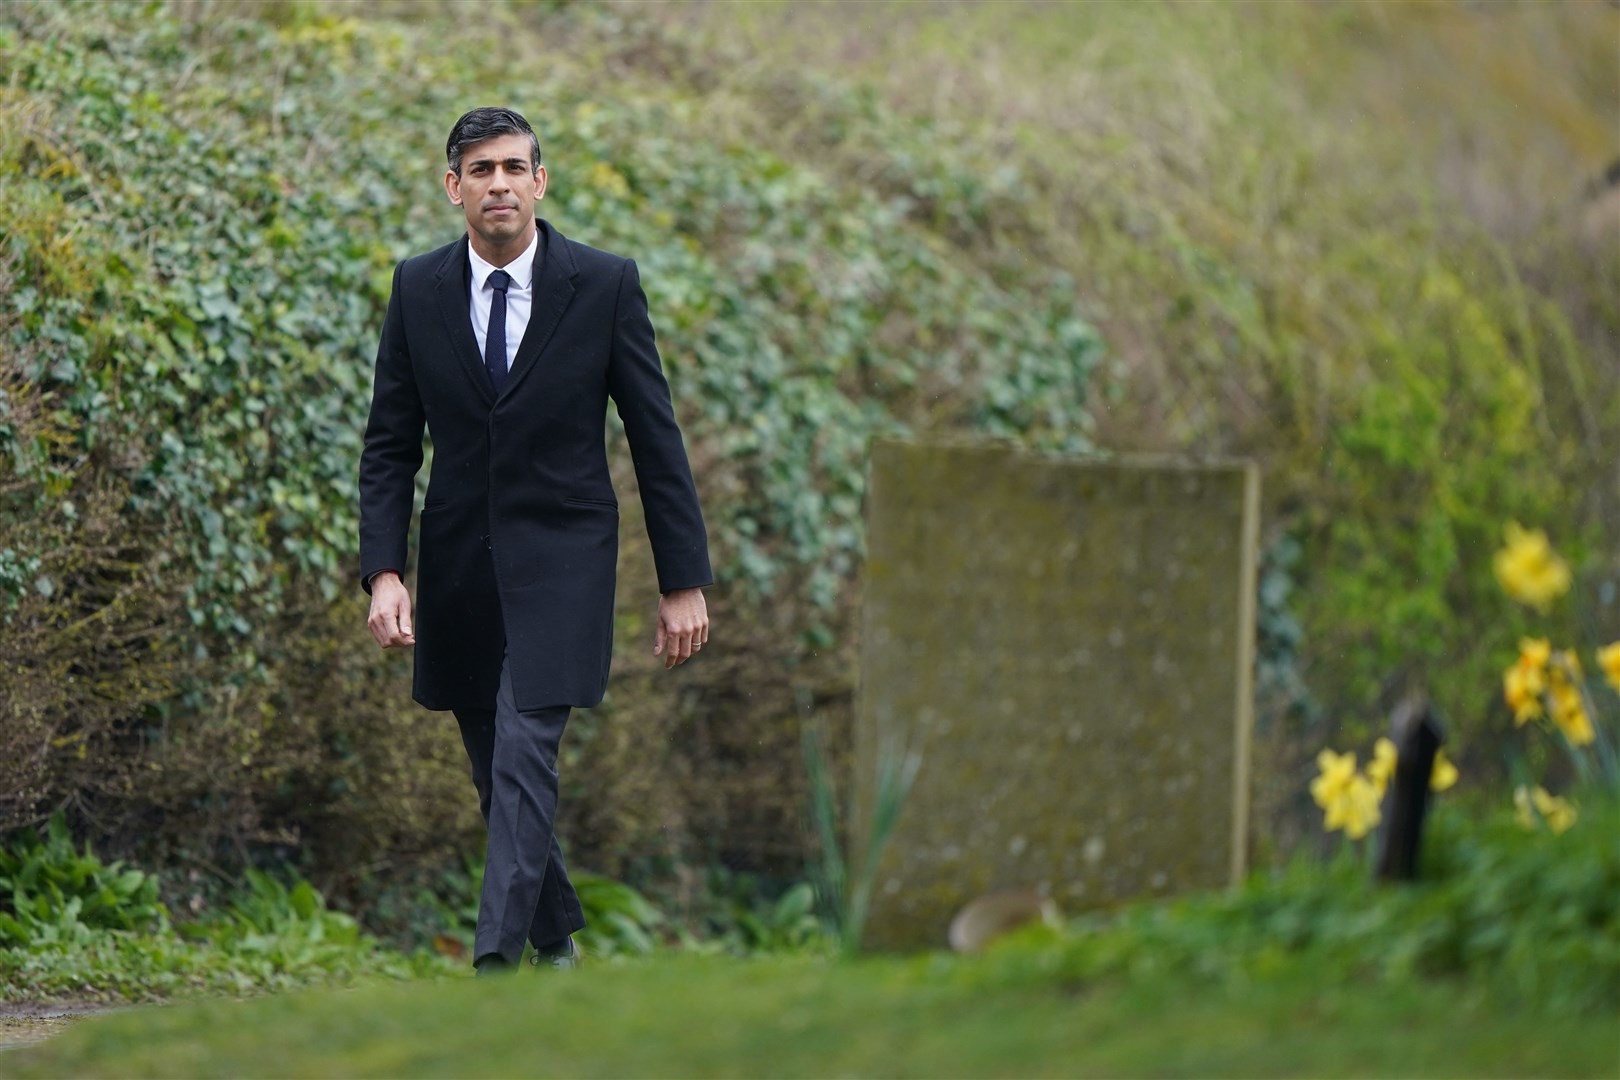 Prime Minister Rishi Sunak arrives for Baroness Boothroyd’s funeral at St George’s Church in Thriplow, Cambridgeshire (Joe Giddens/PA)